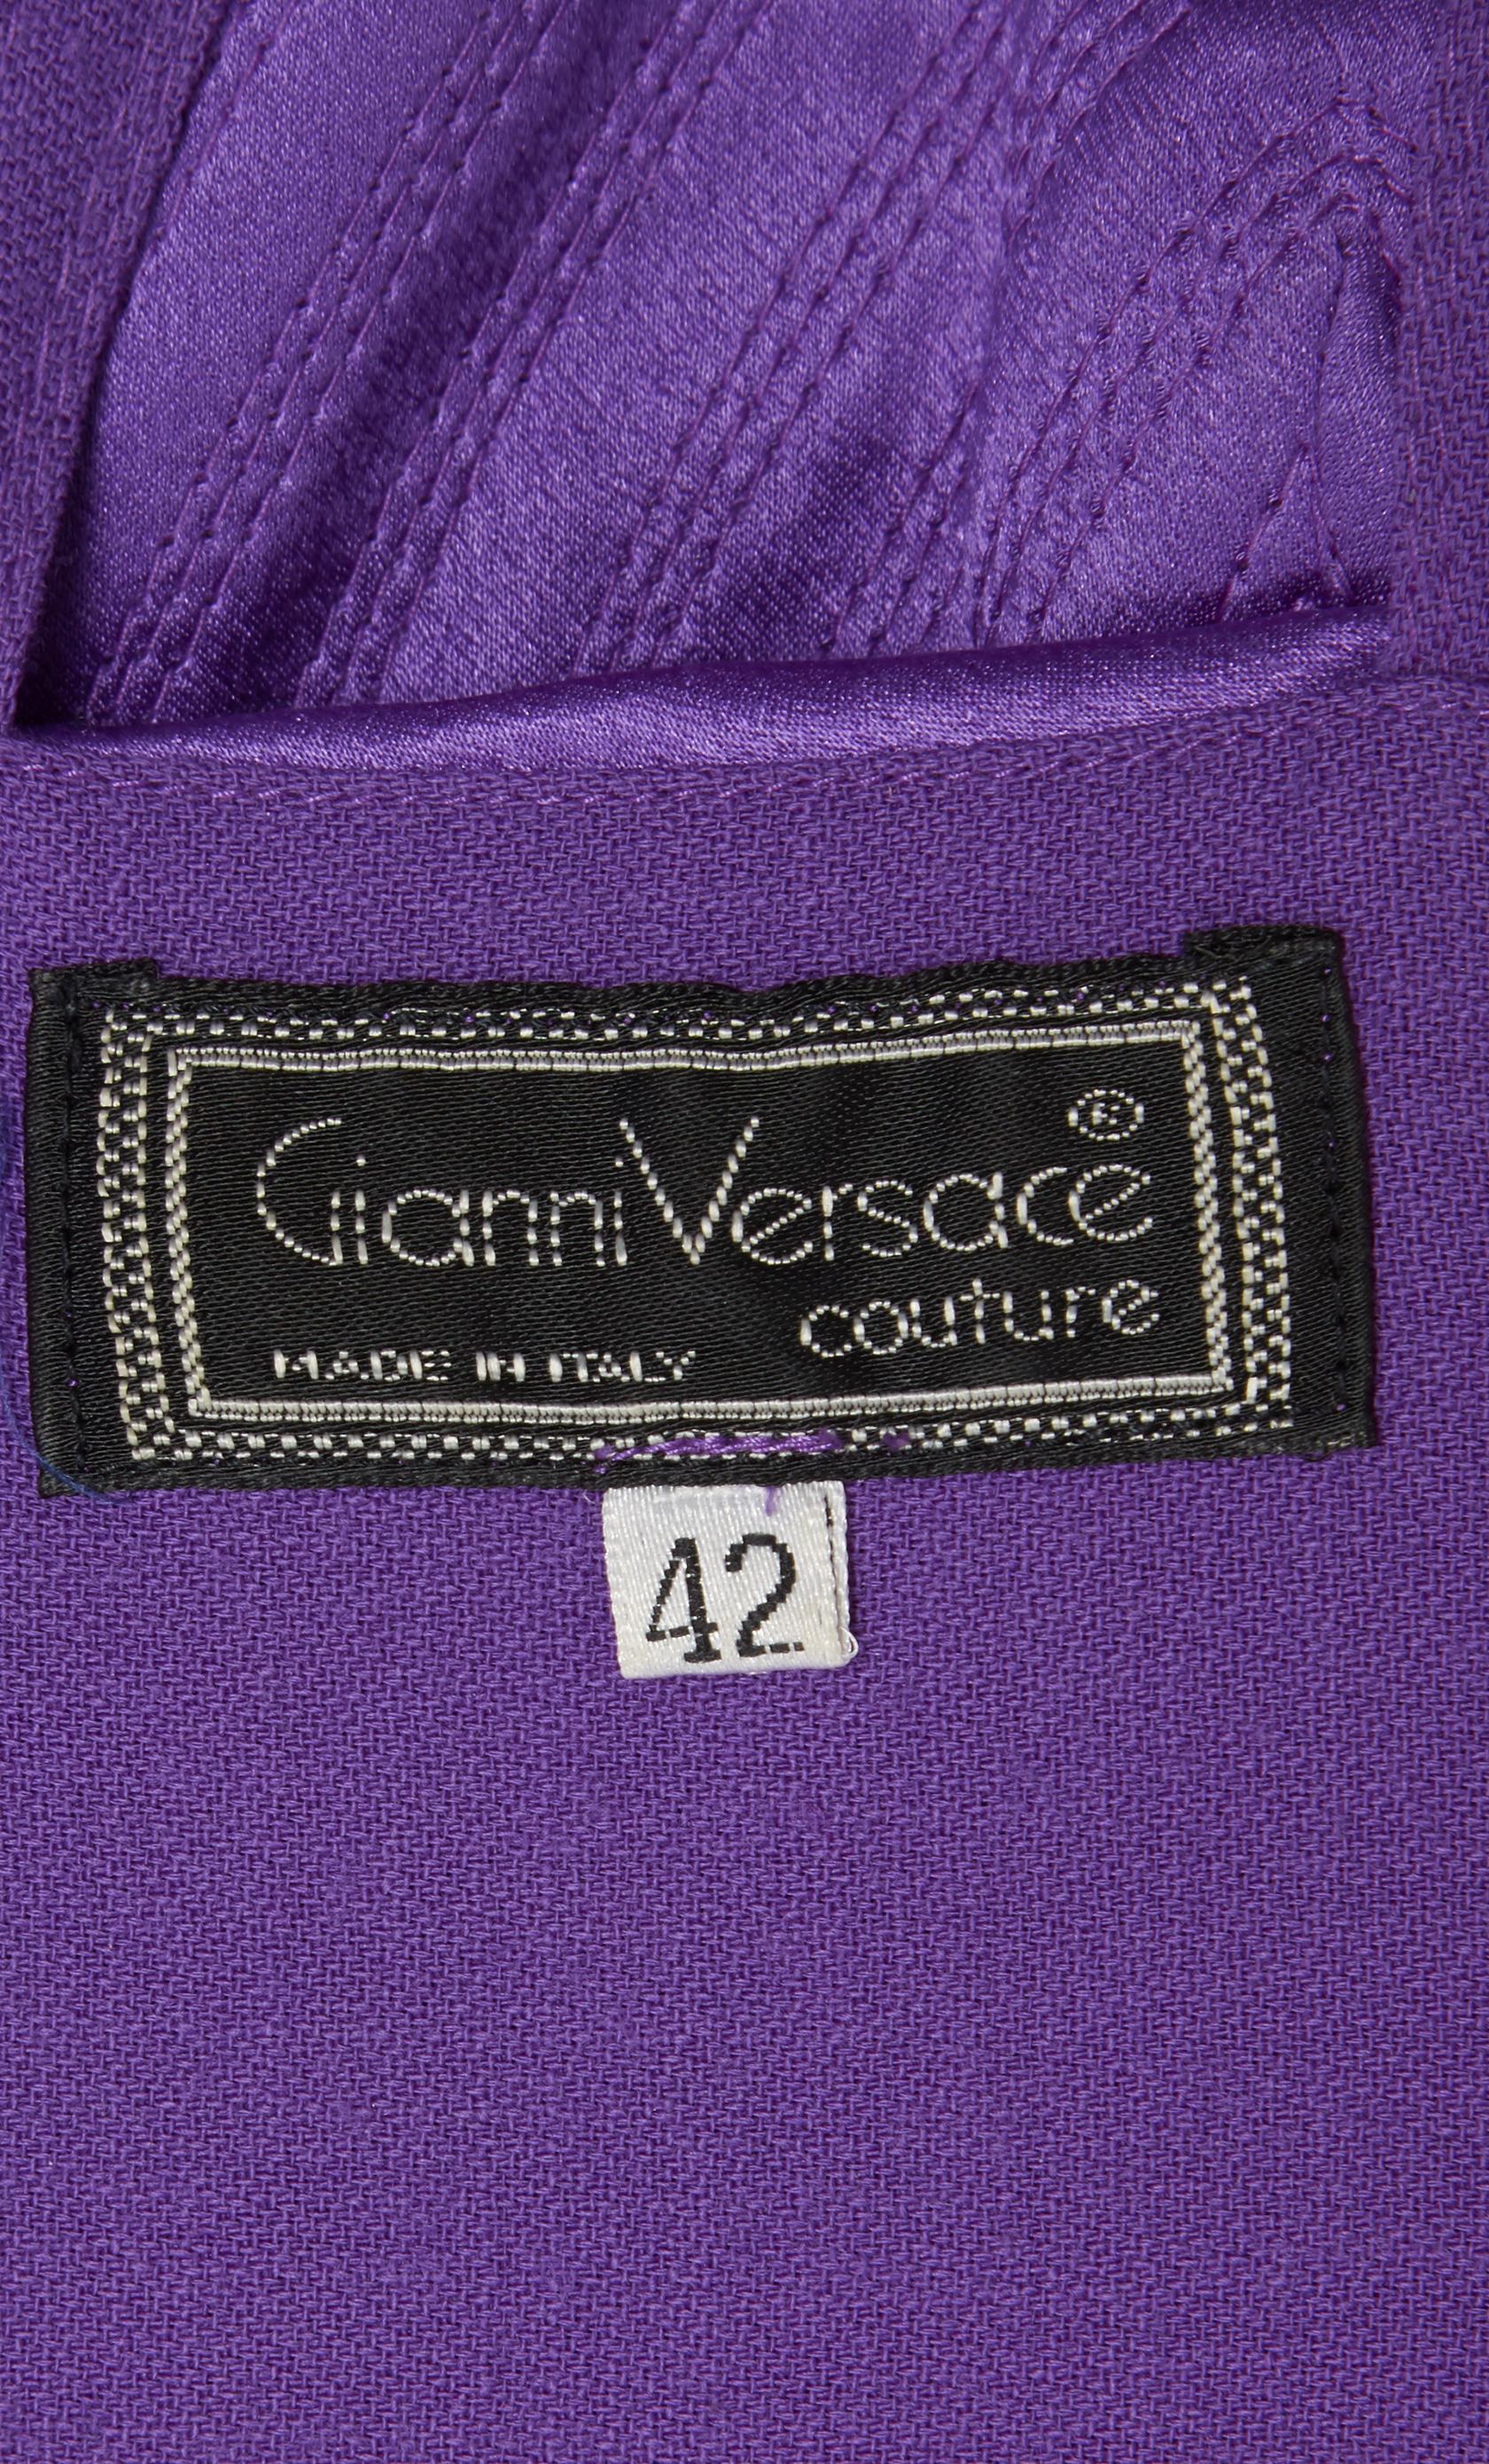 Women's Gianni Versace Couture, purple silk cocktail dress, Circa 1980 For Sale